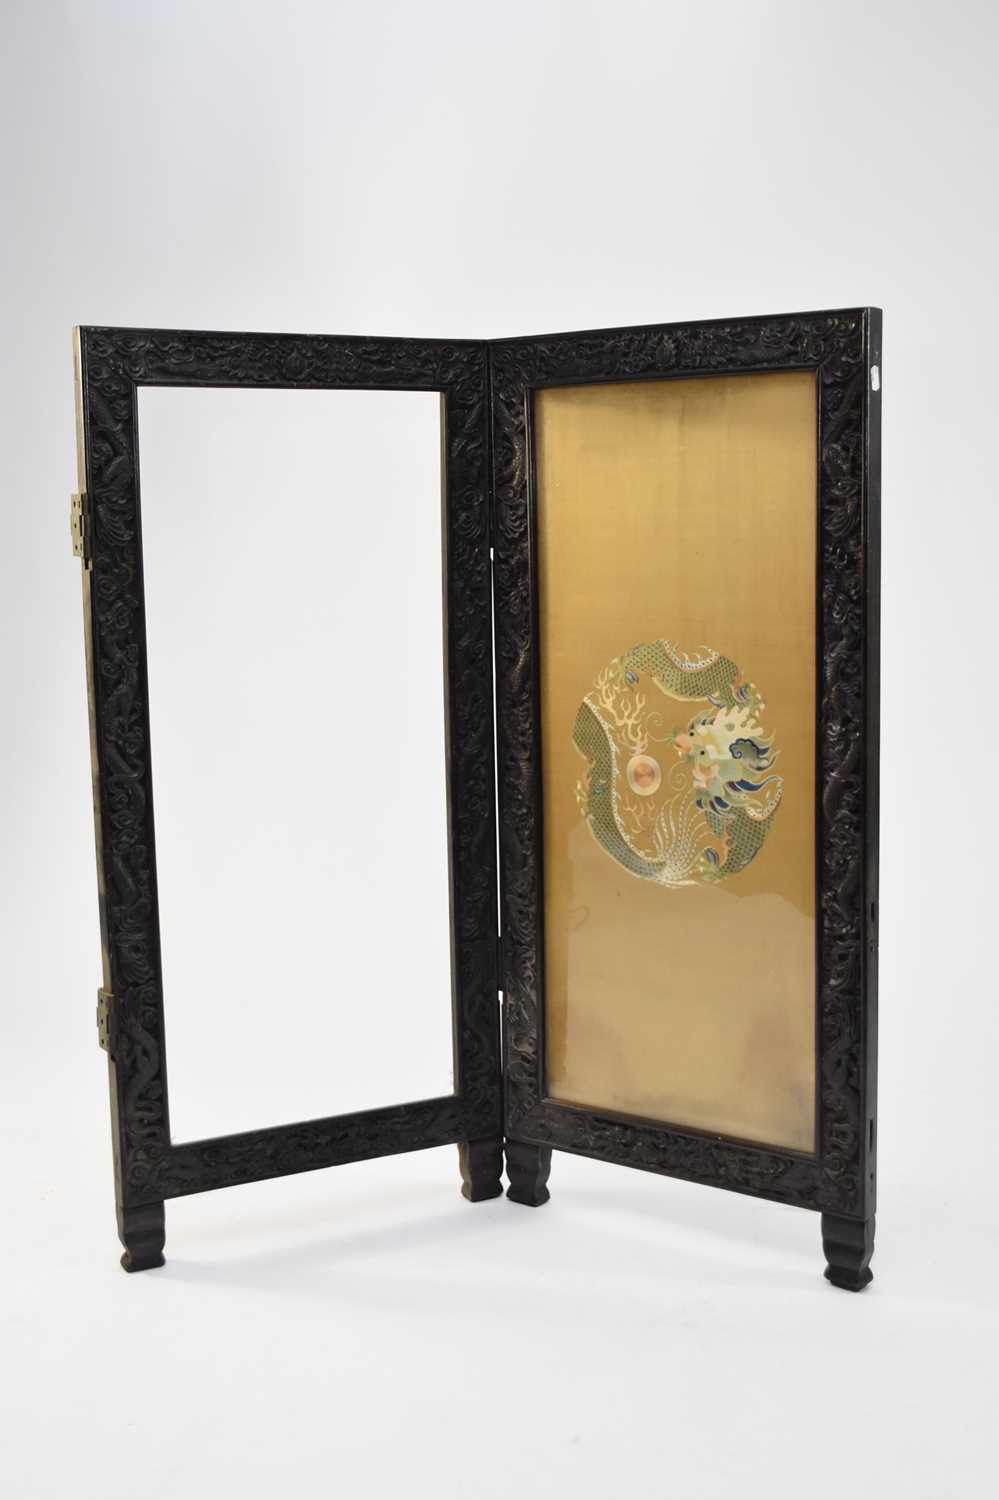 A Chinese silk embroidered screen panel and further frame, 19th century